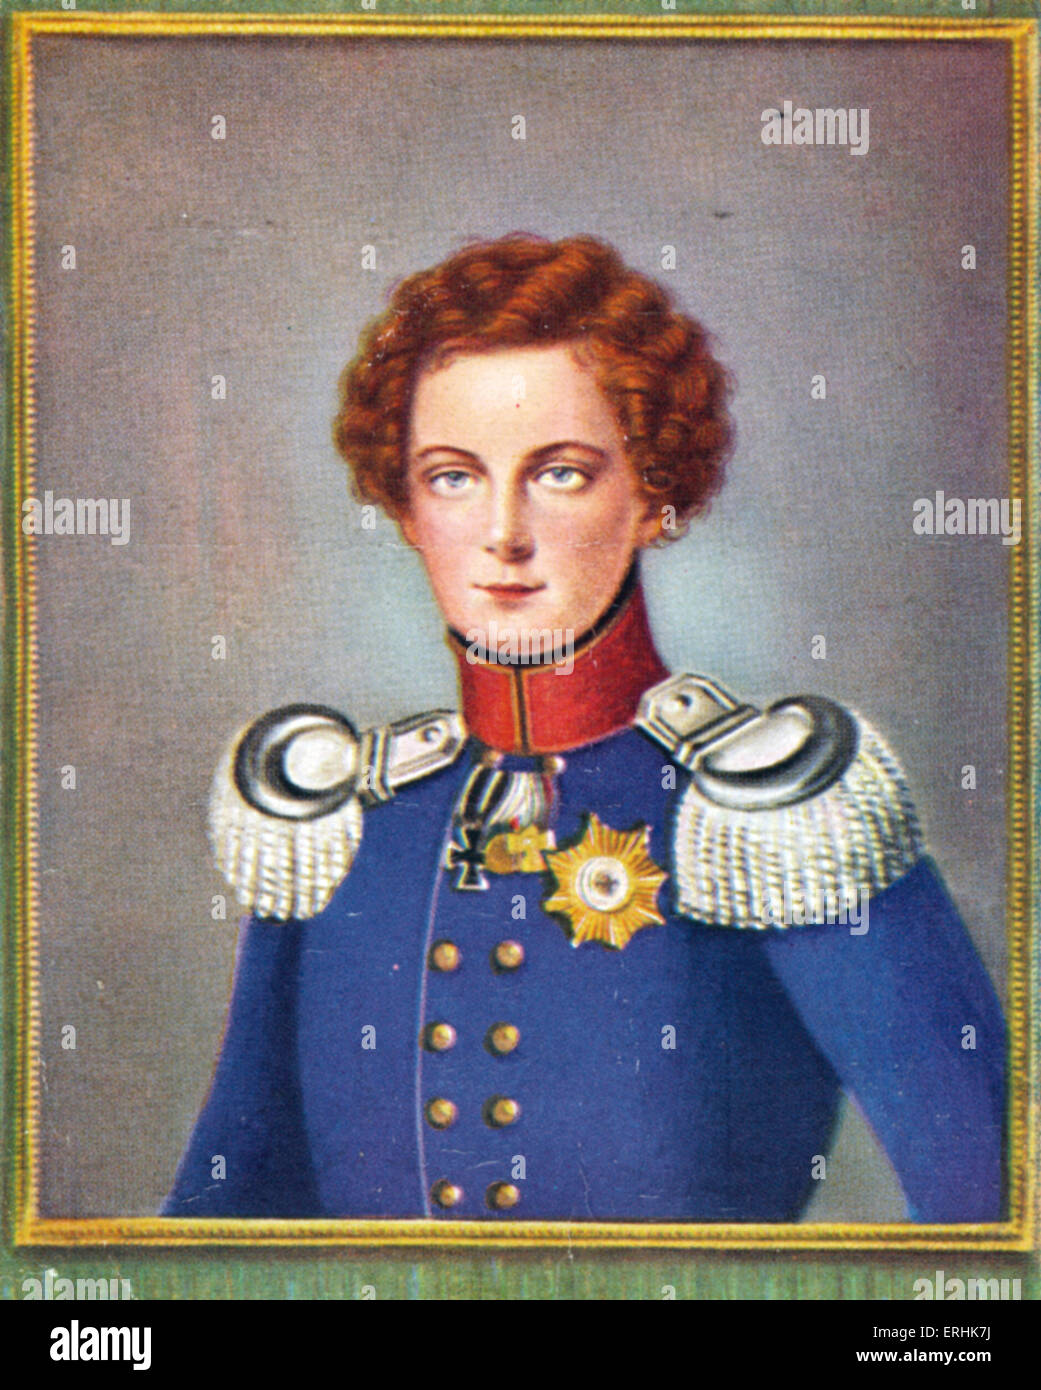 Frederick William IV (Friedrich Wilhelm IV). Portrait of the King of Prussia as a young man. After a miniature by Christian Stock Photo